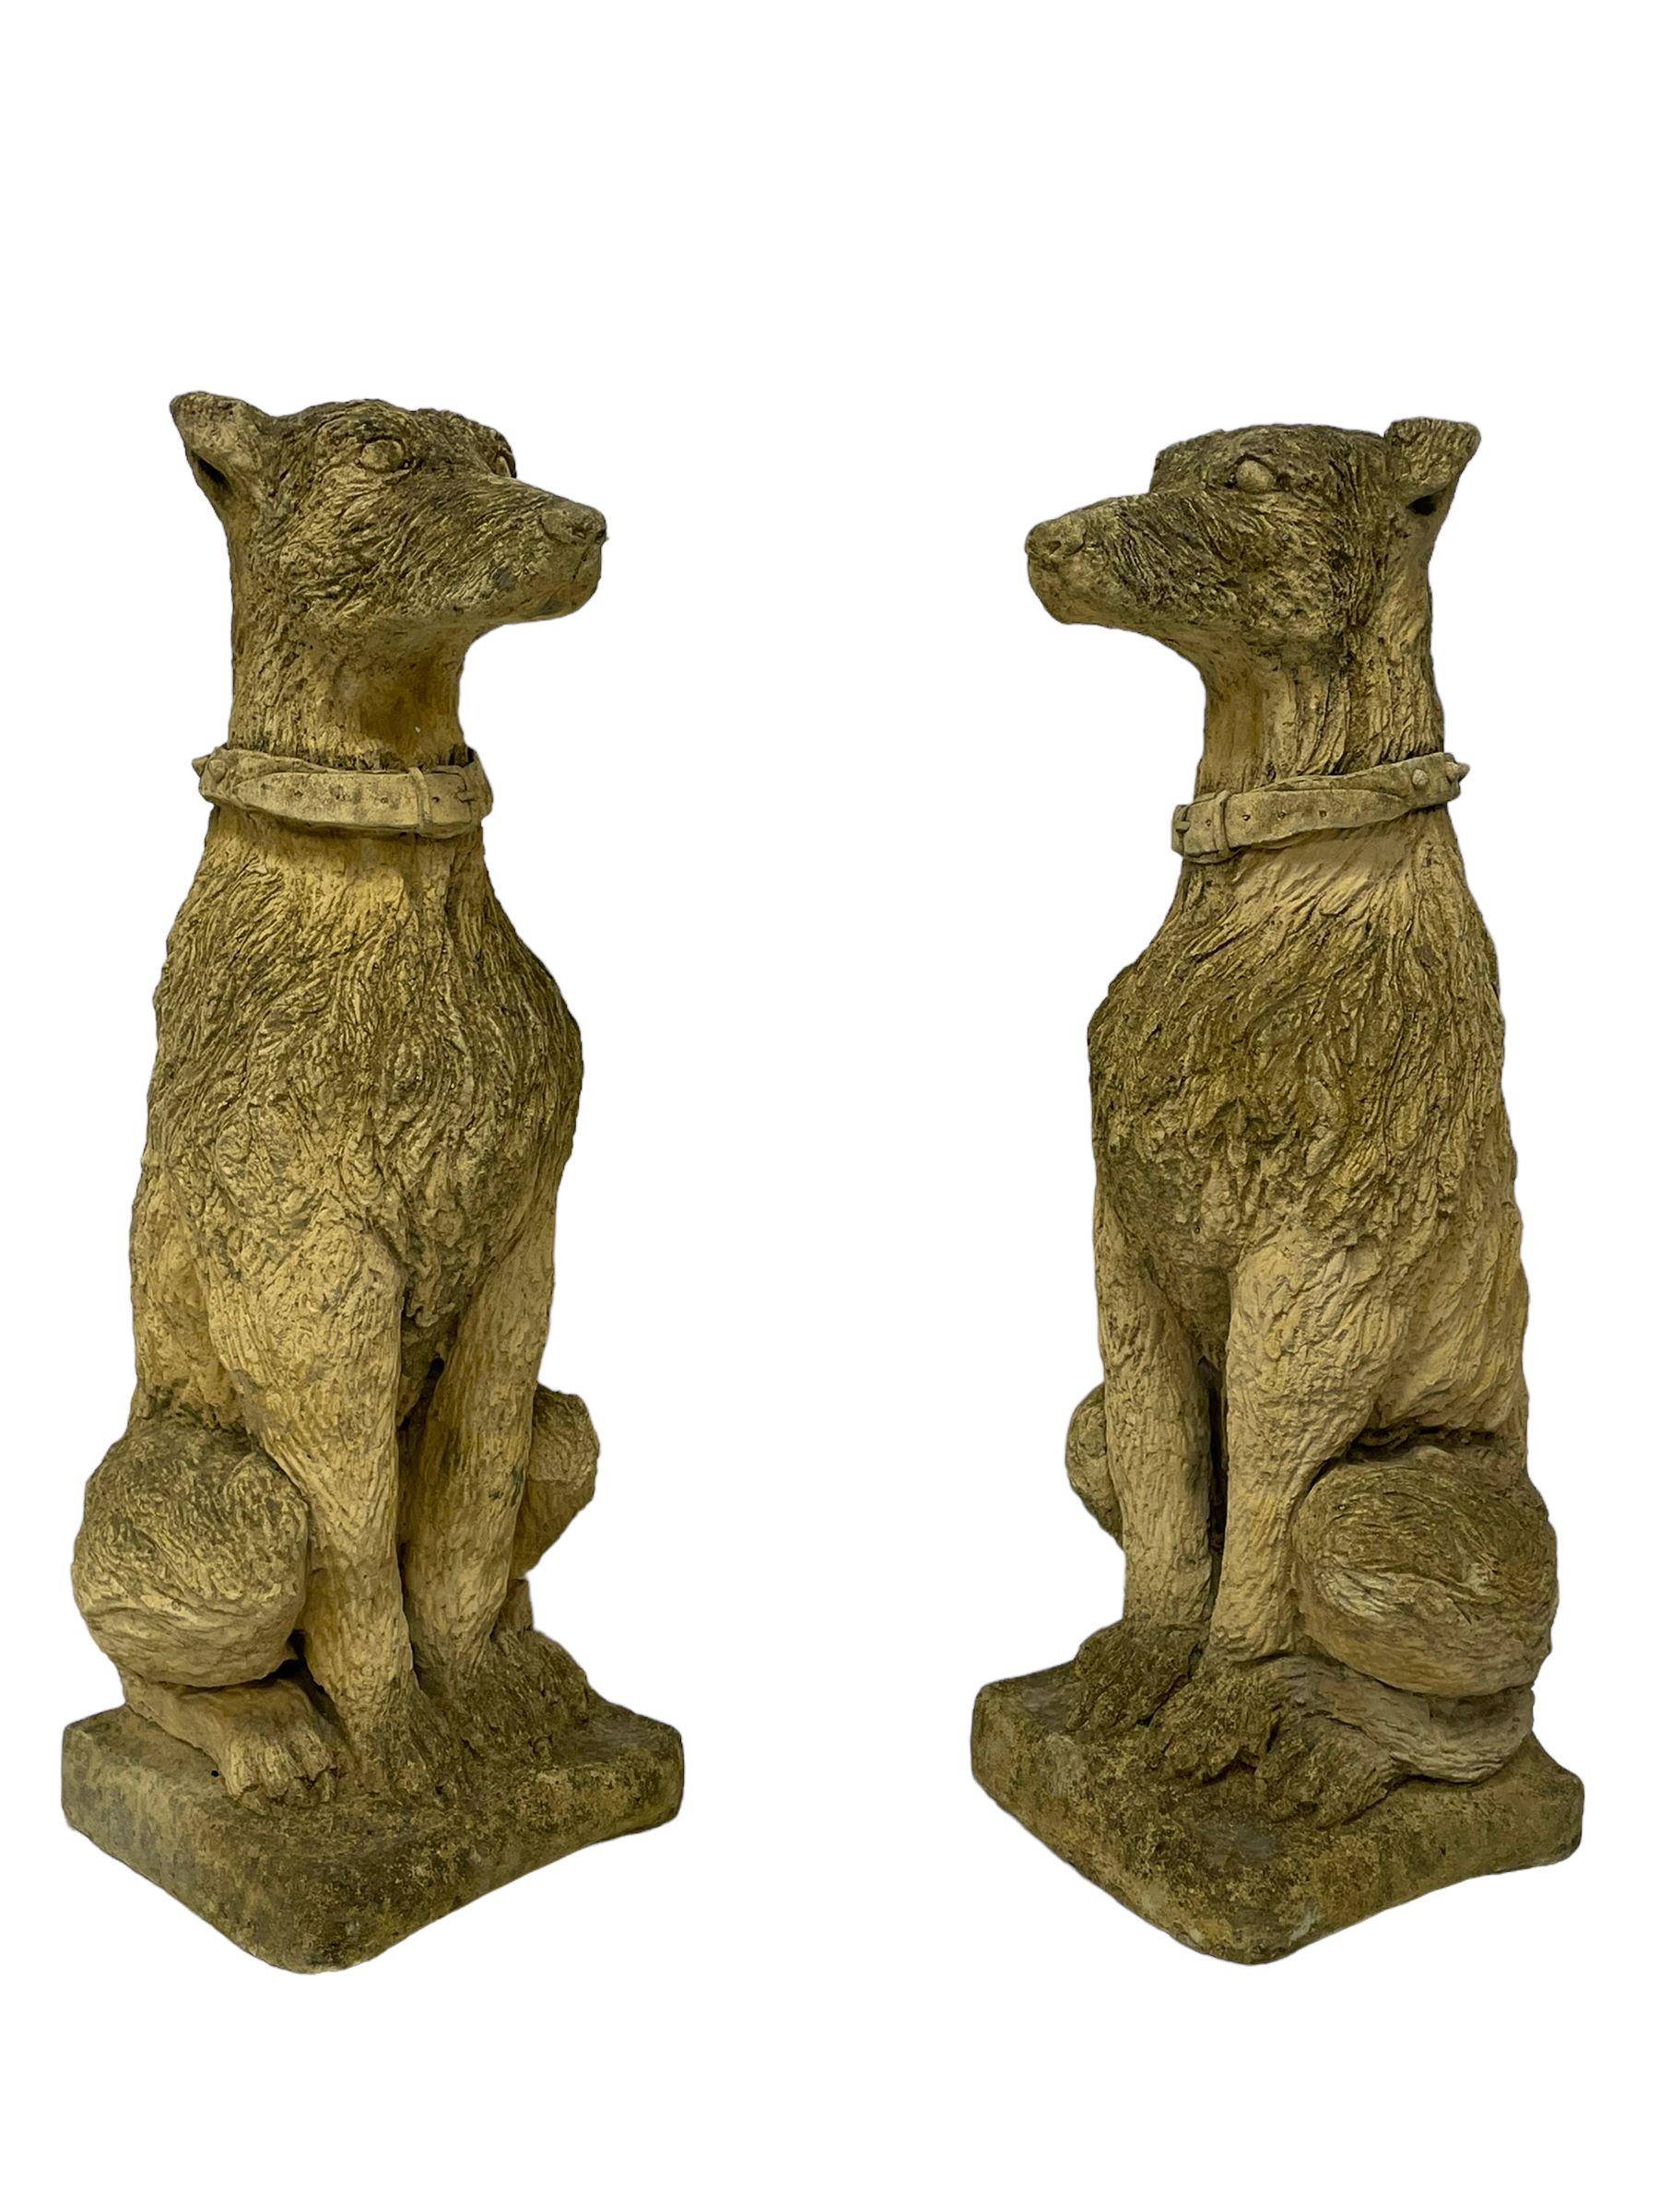 Pair of composite stone garden ornaments in the form of seated lurchers - Image 4 of 8